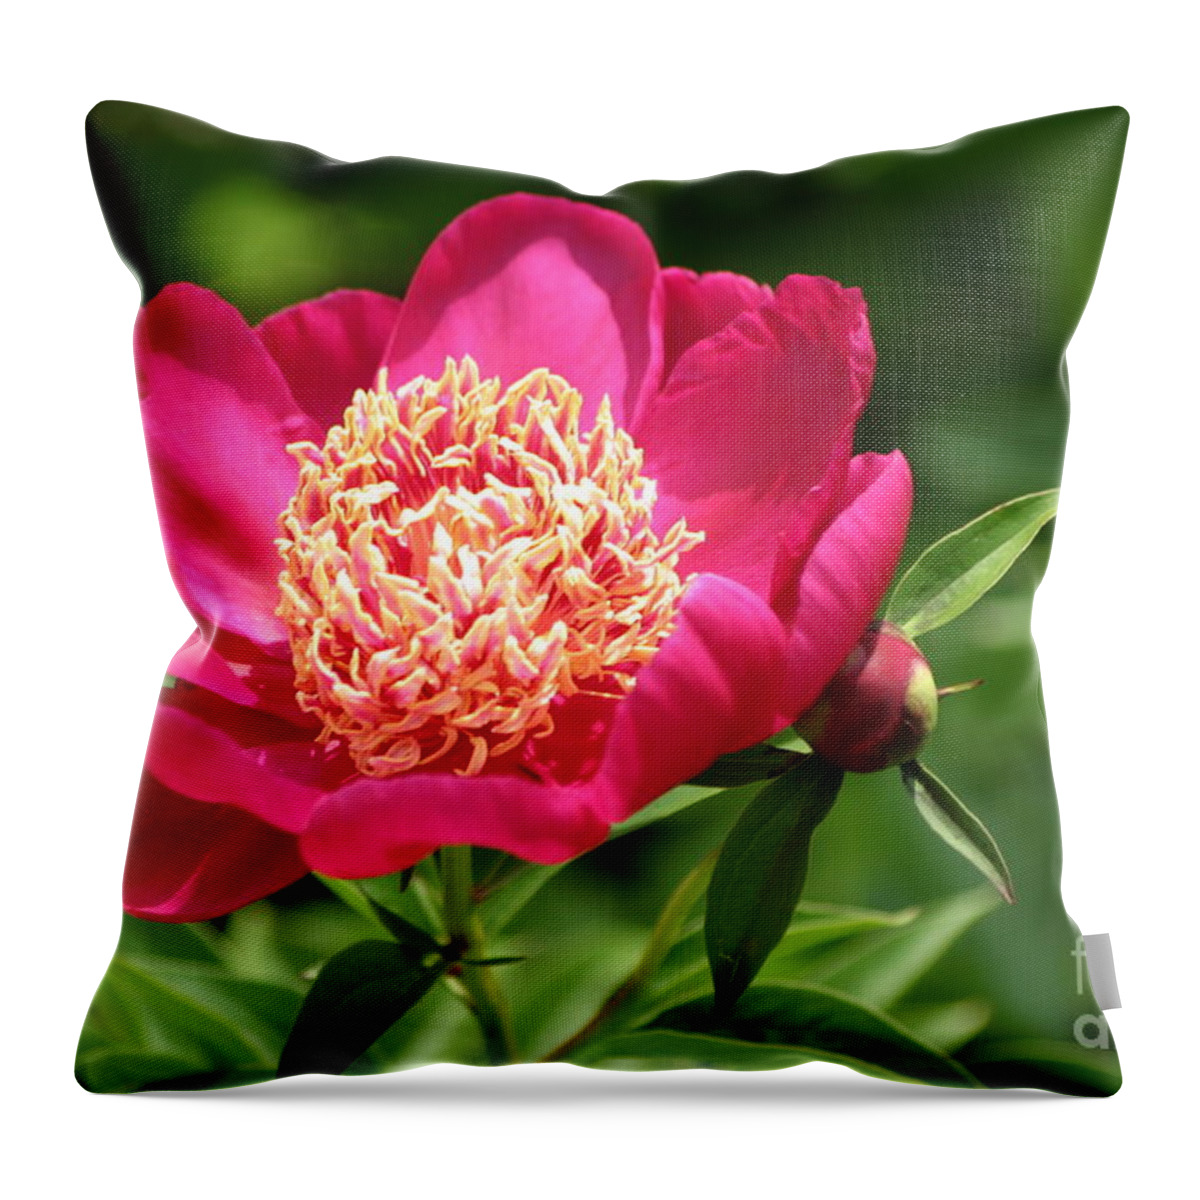 Peony Throw Pillow featuring the photograph Pink Peony by Living Color Photography Lorraine Lynch